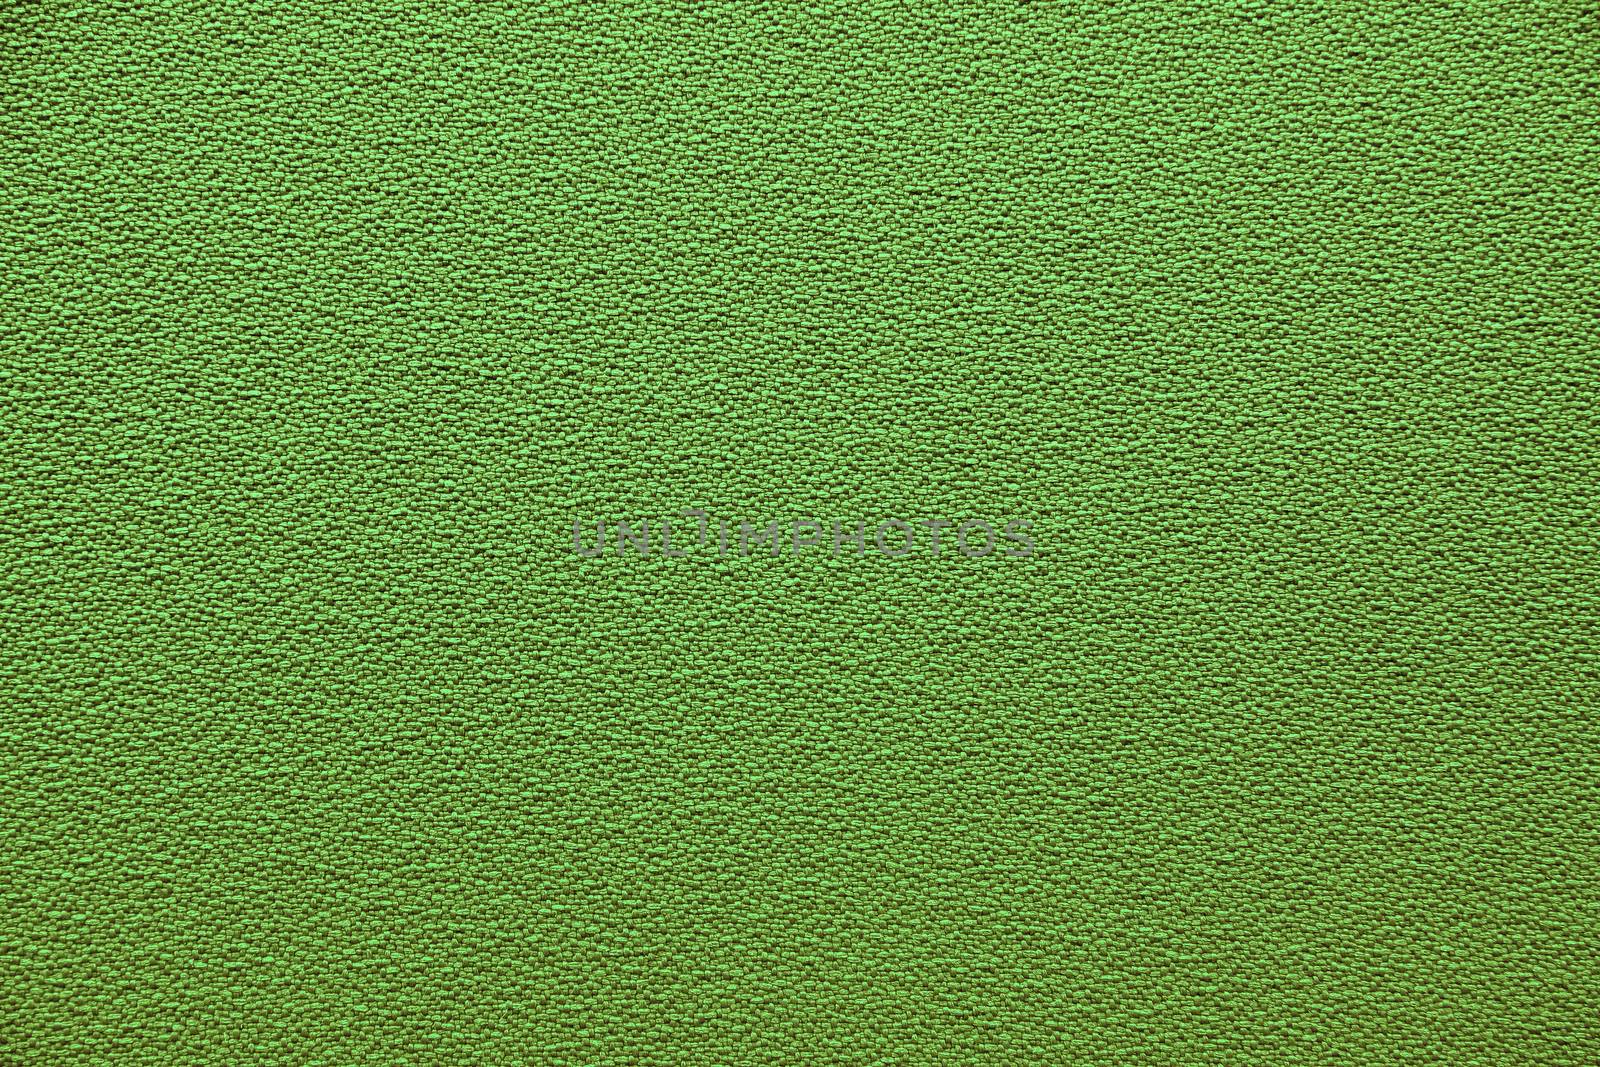 texture of green fabric Upholstery for use backgrounds